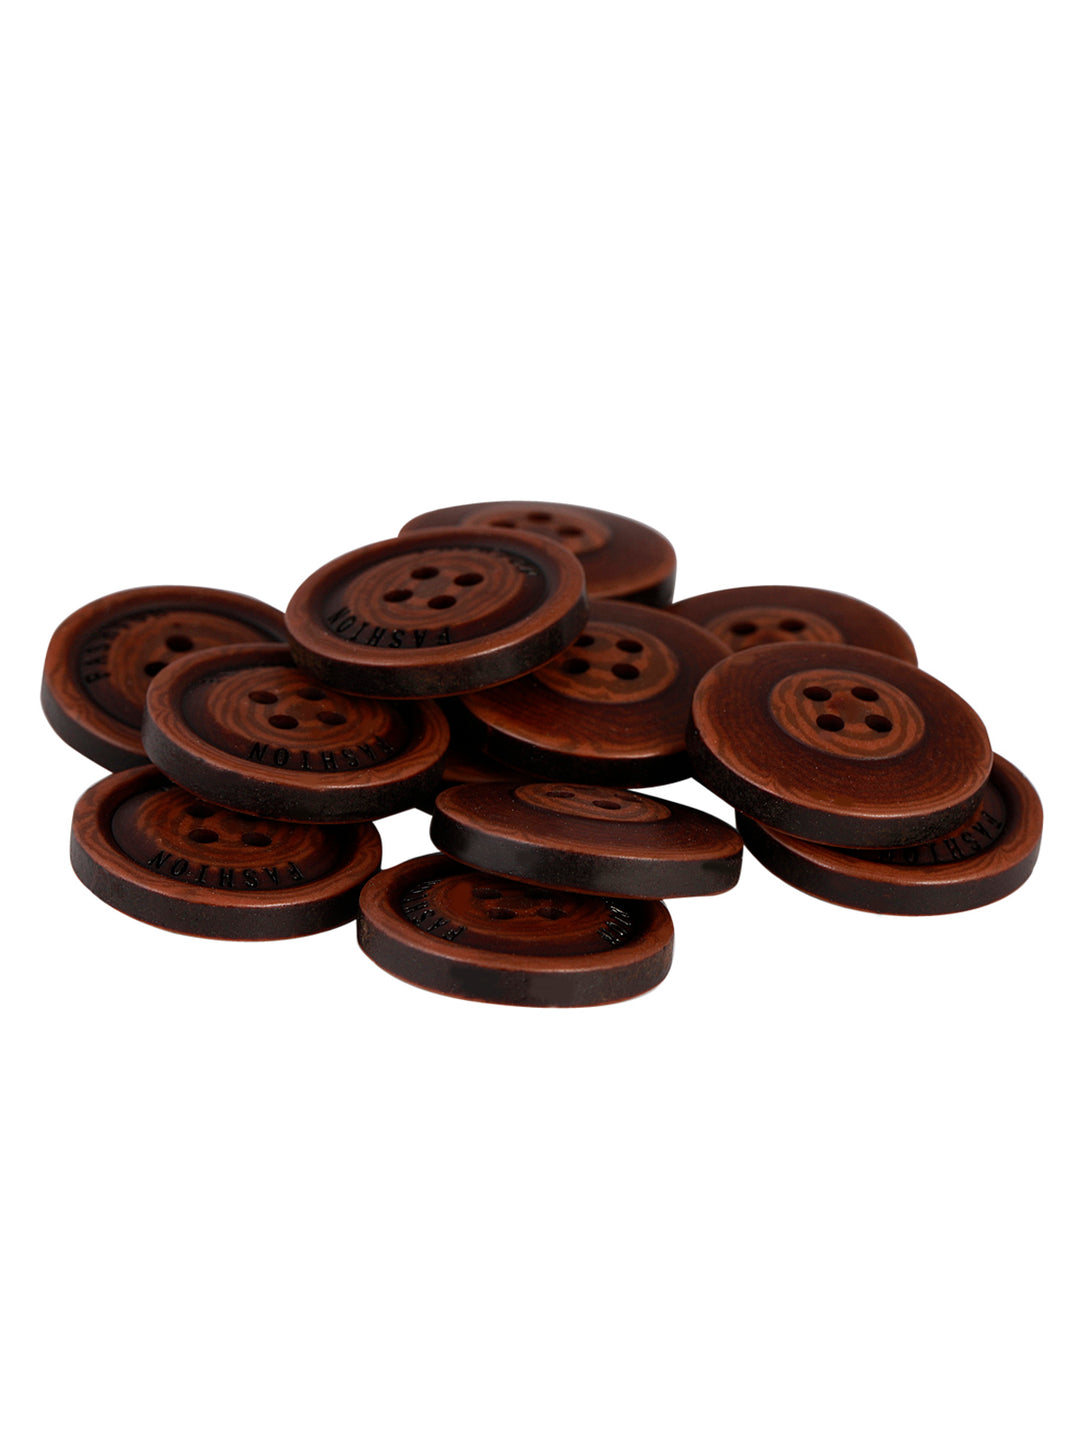 Wood-like Brown Round Shape Coat Buttons